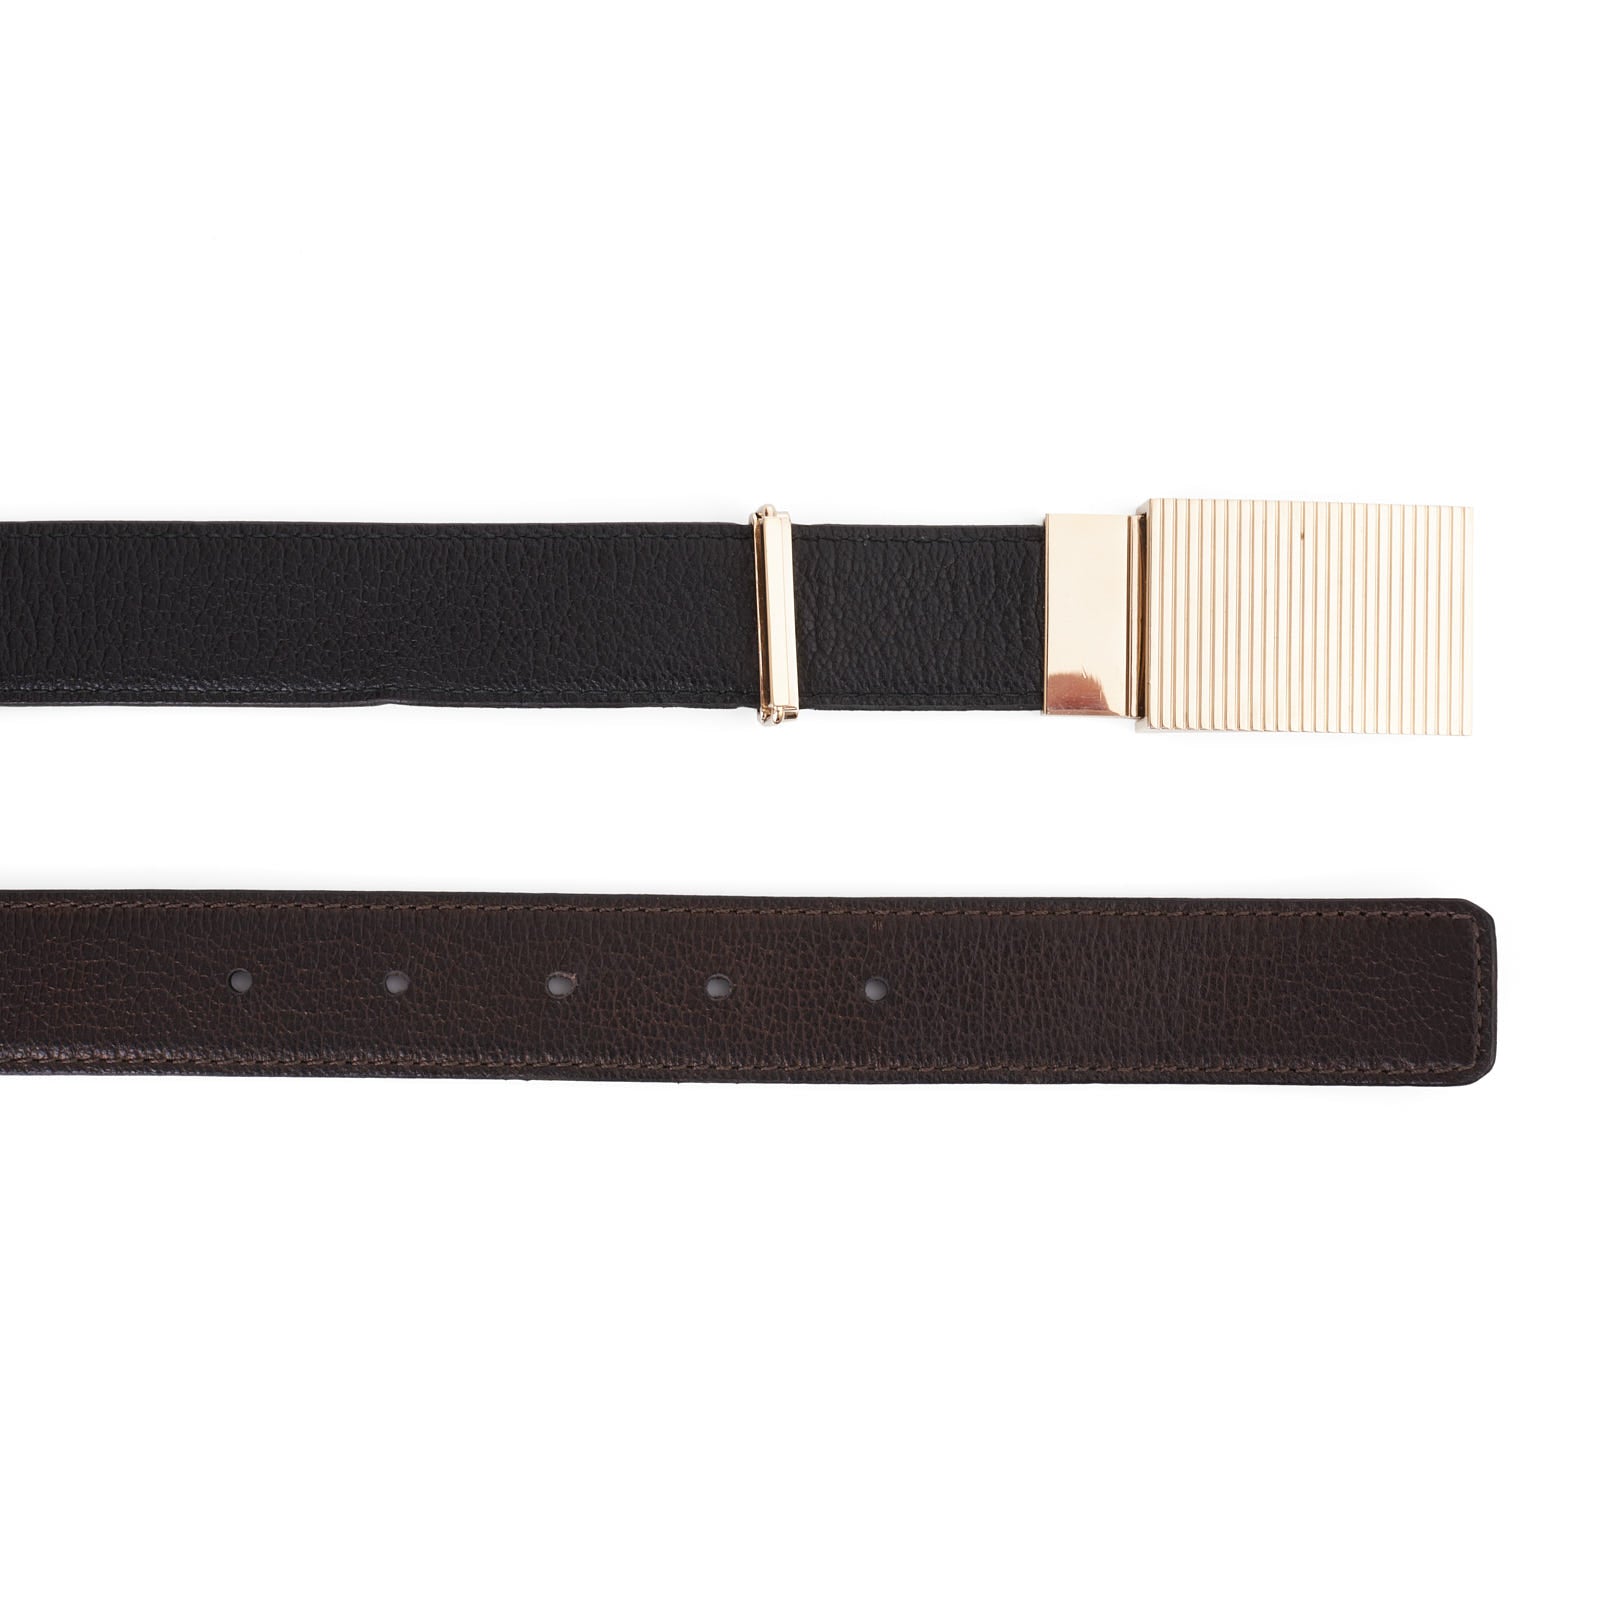 TOM FORD Brown-Black Leather Reversible Belt with Swivel Gold Buckle 36" 90cm NEW TOM FORD